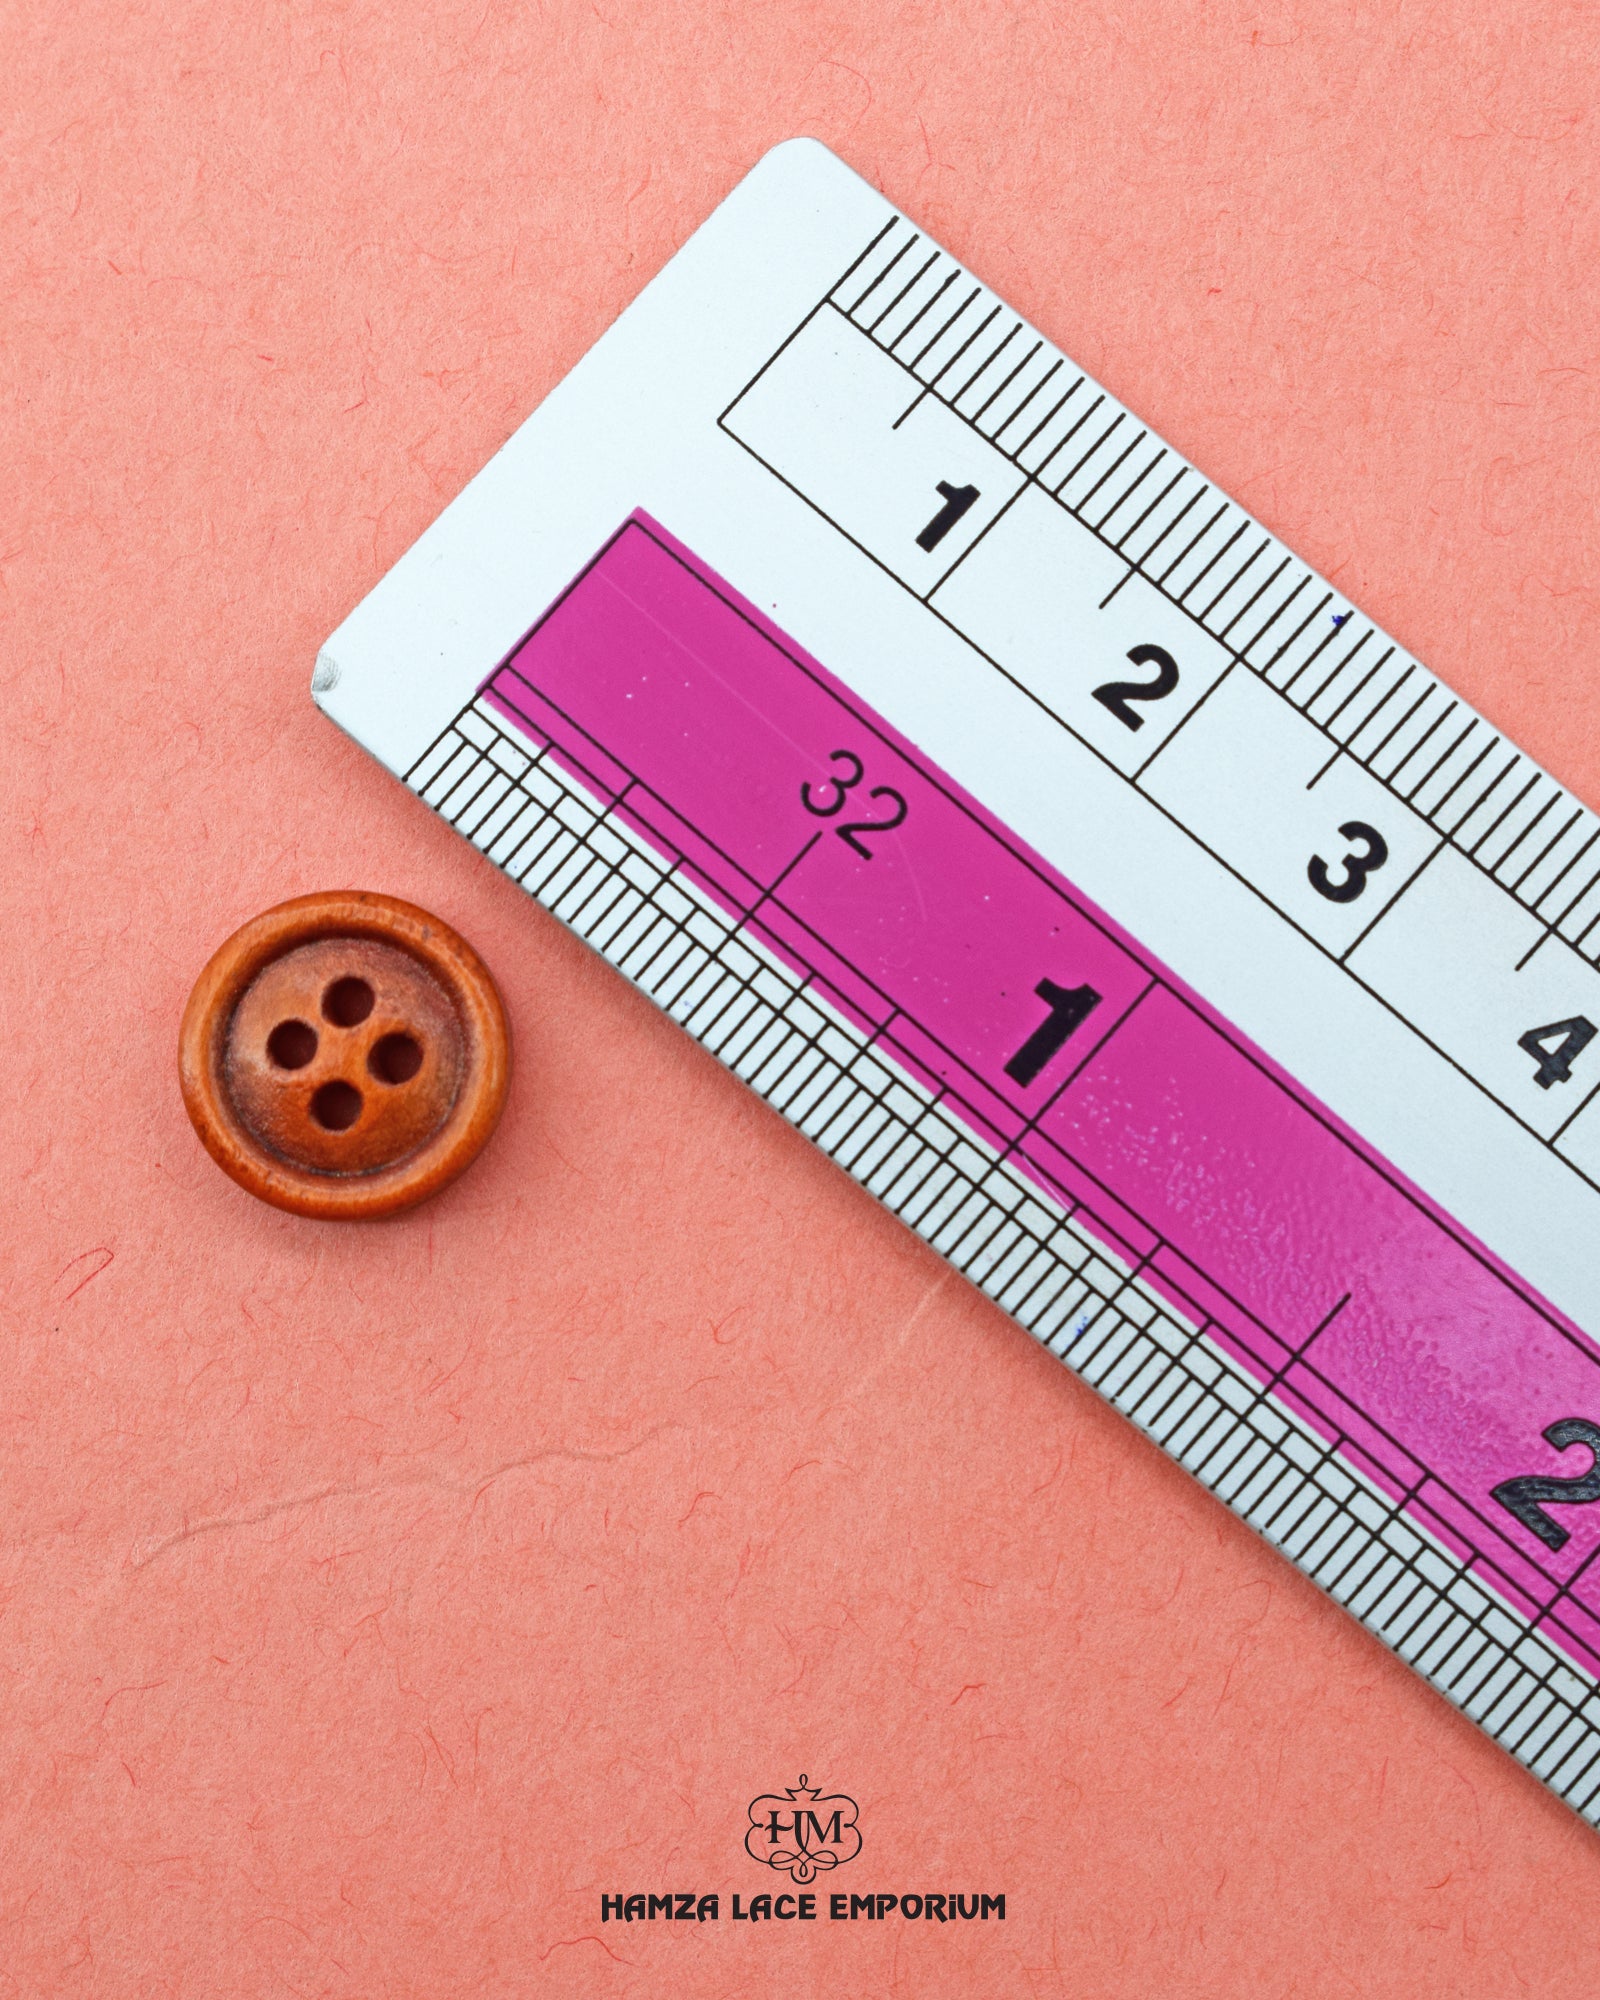 Size of the 'Brown Wood Button WB93' is shown with a ruler